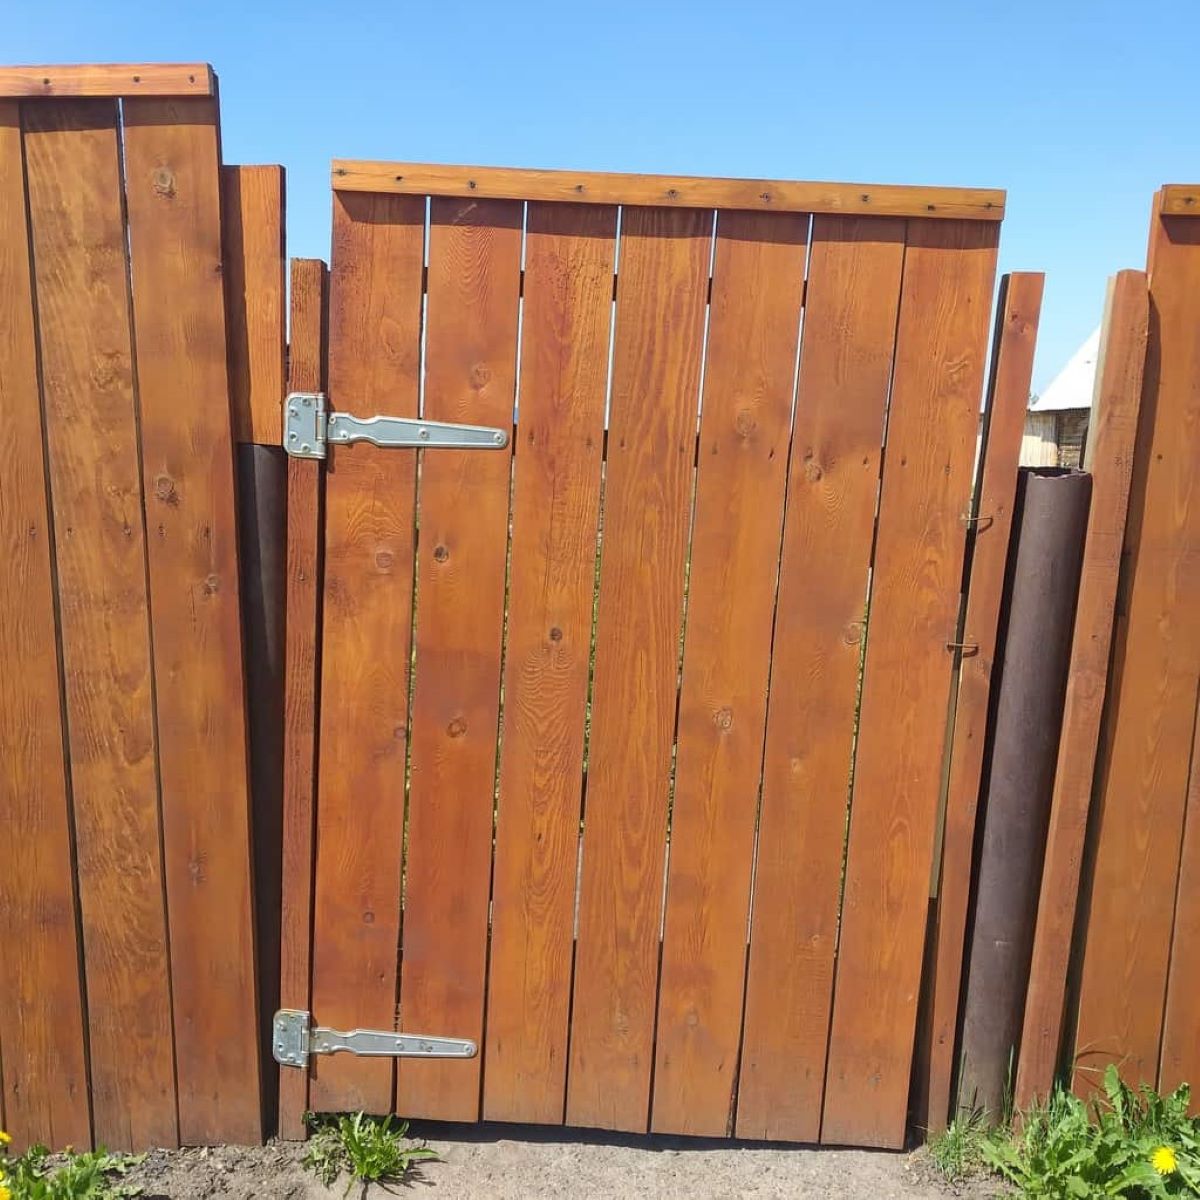 How To Fix Fence Gate